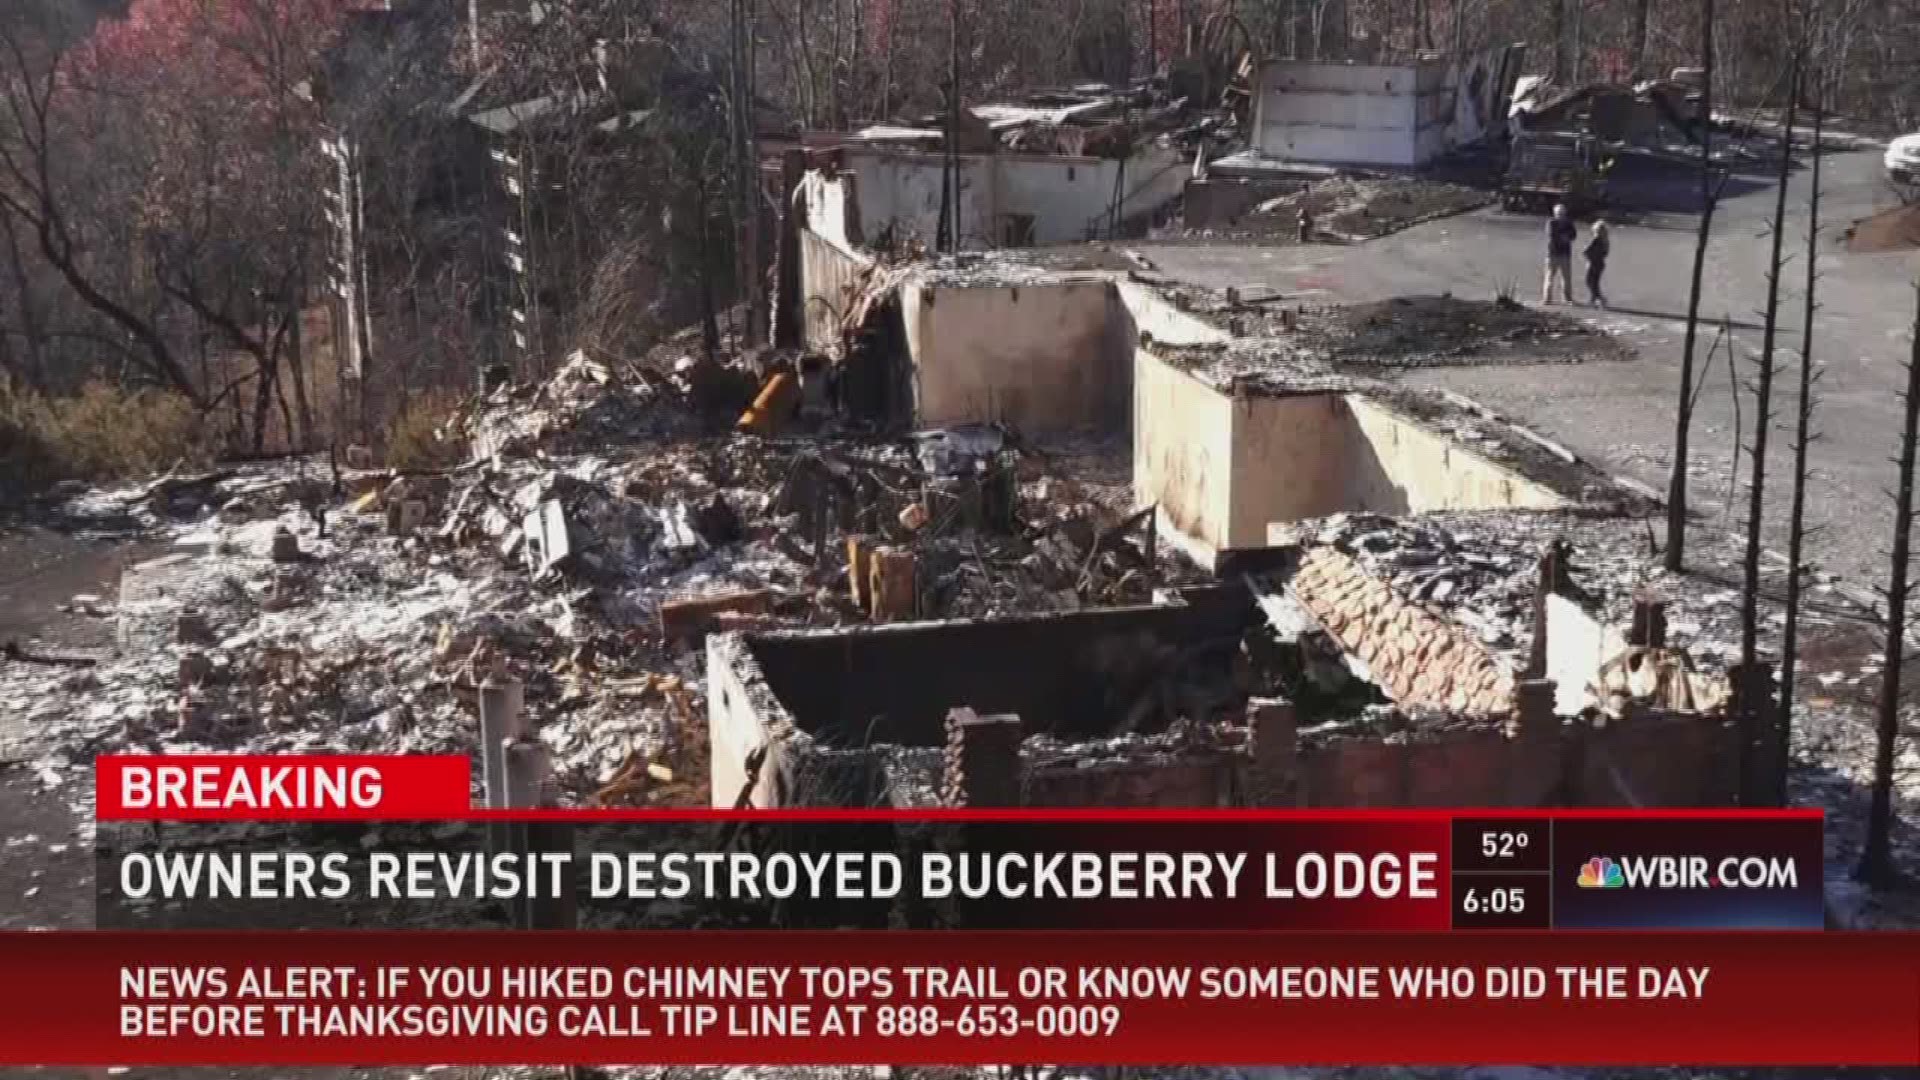 Buddy McLean says he plans to rebuild Buckberry Lodge, the Smoky Mountain resort he created and filled with family heirlooms and memories. Dec 2, 2016.